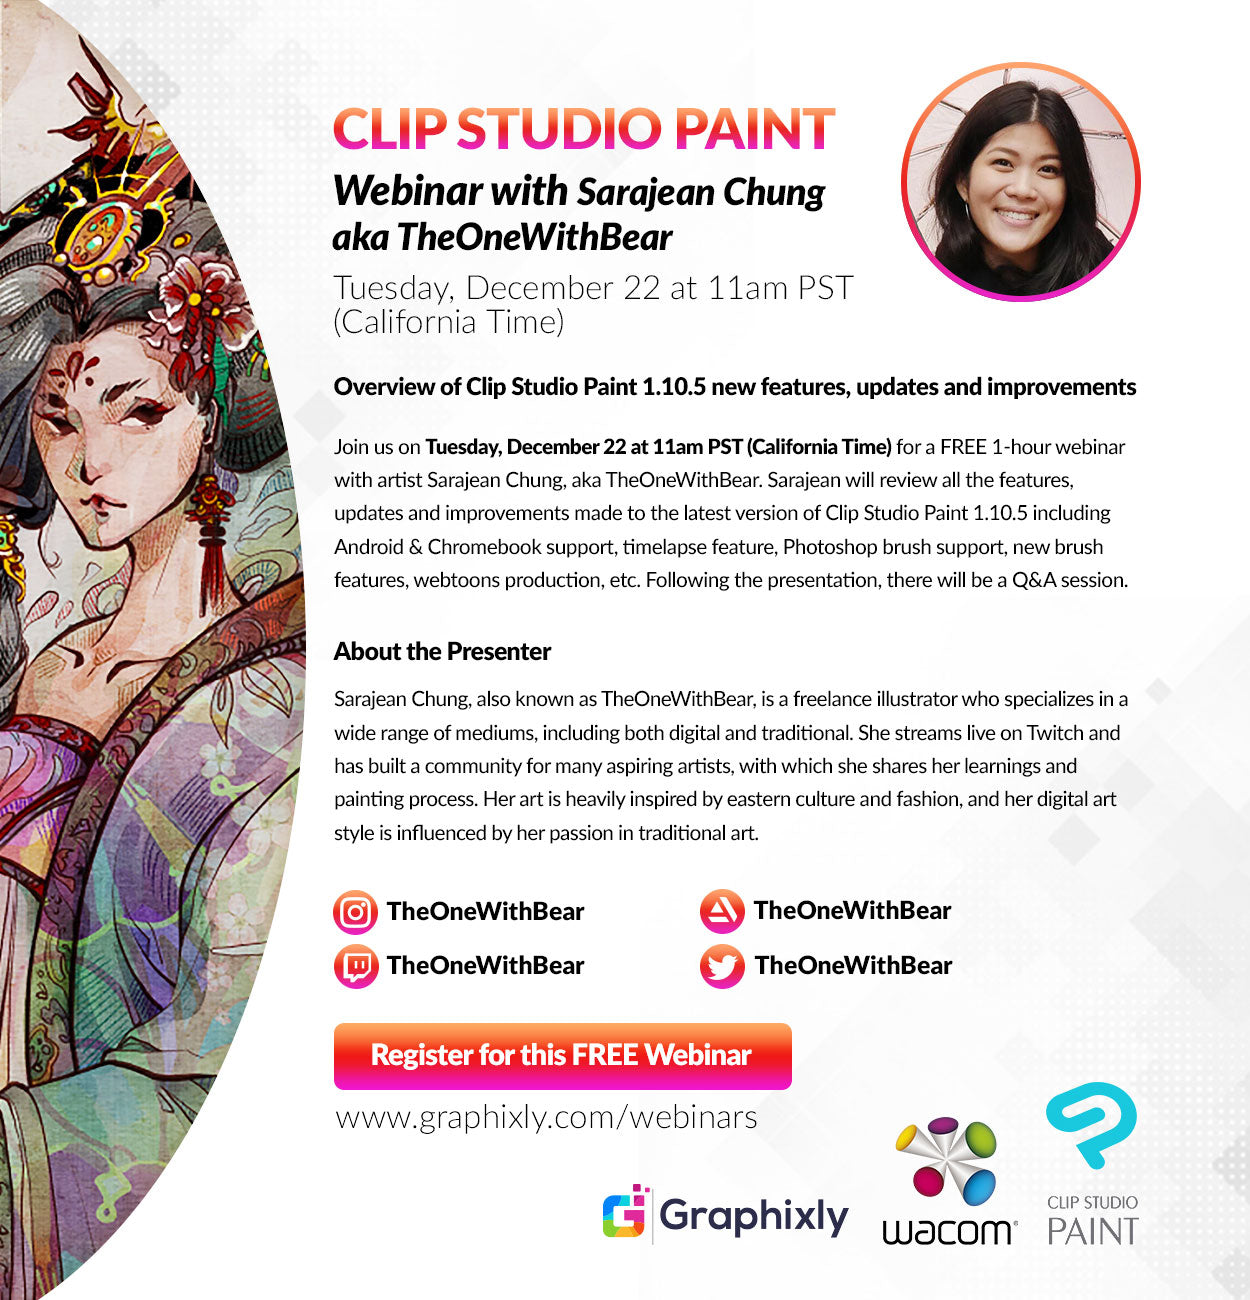 Webinar – Overview of Clip Studio Paint 1.10.5 new features, updates and improvements with Sarajean Chung